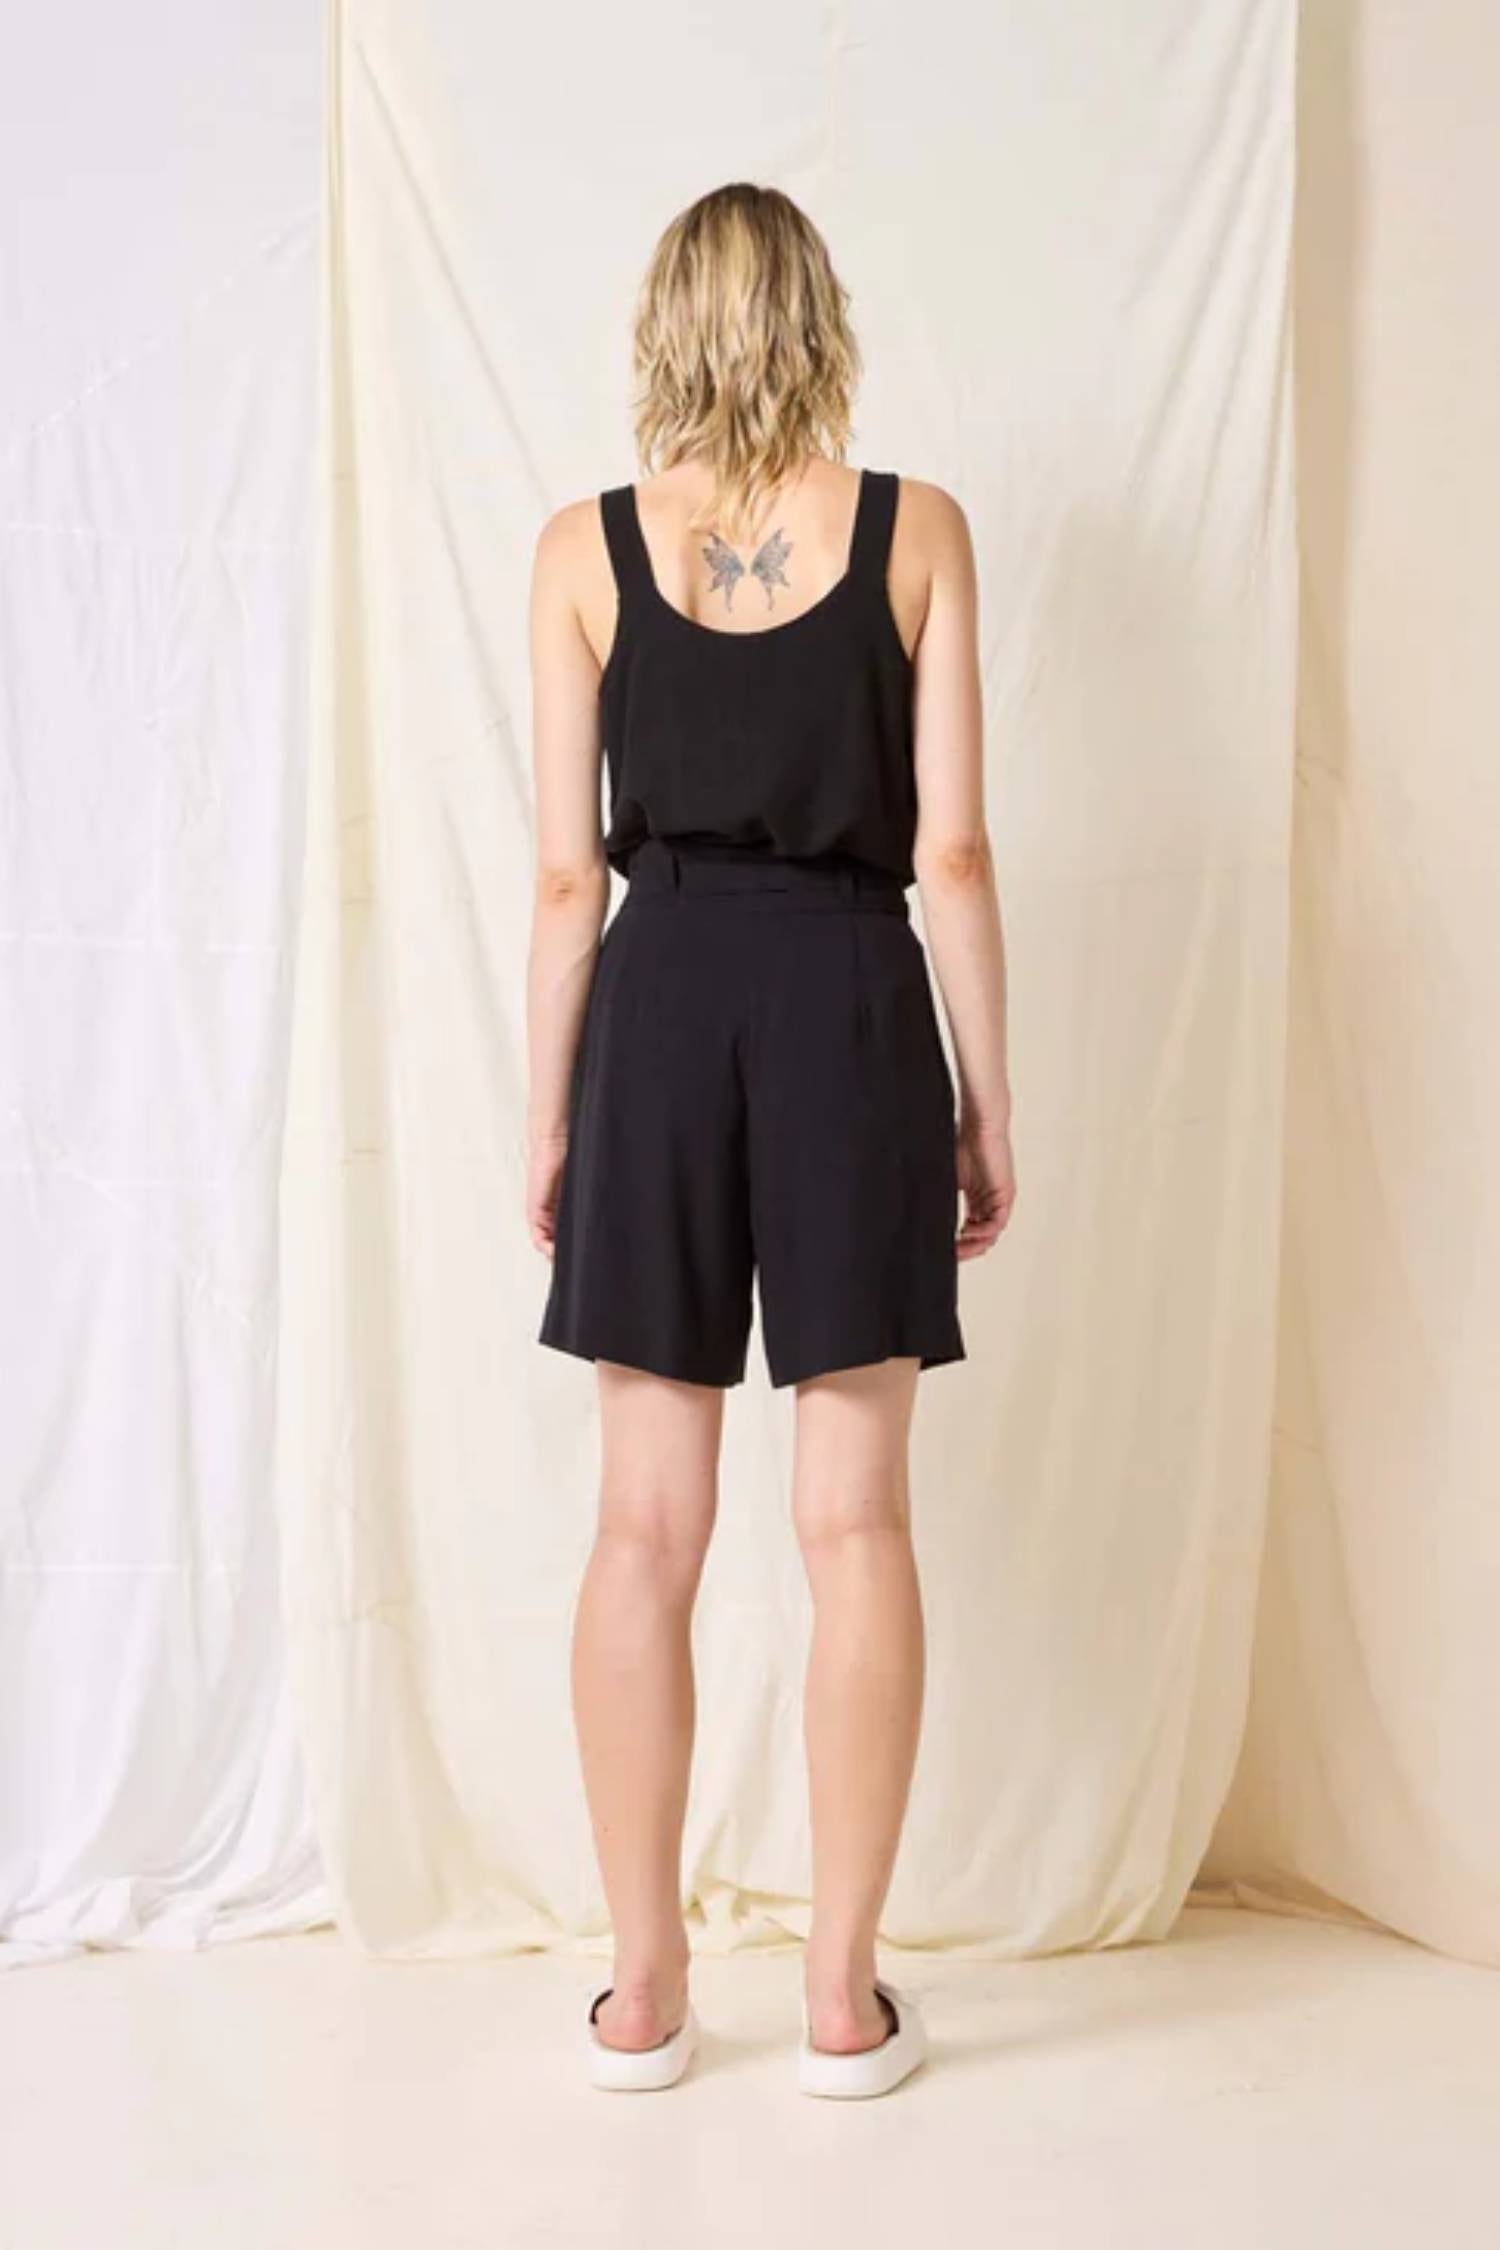 Kamala Short by Cokluch, Black, back view, high waist, paper-bag effect, ring belt, front pleats, button closure at waist, pockets, eco-fabric, OEKO-TEX certified, sizes XS to XL, made in Montreal